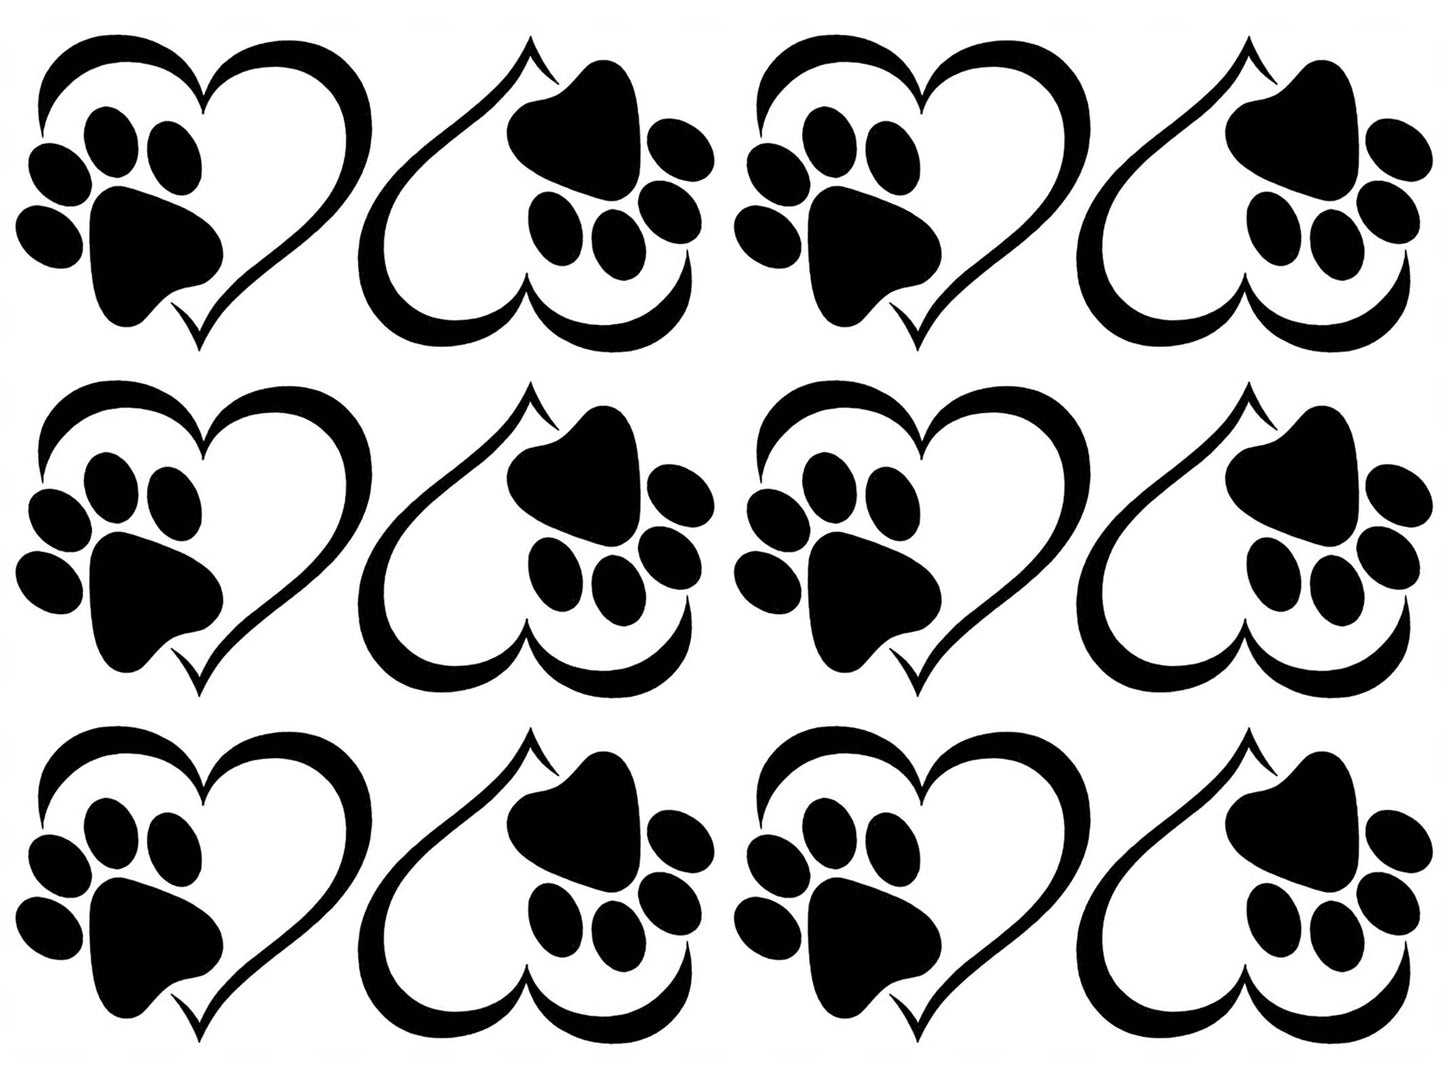 Heart Paw Print 12 pcs 1-3/4" Black Fused Glass Decals